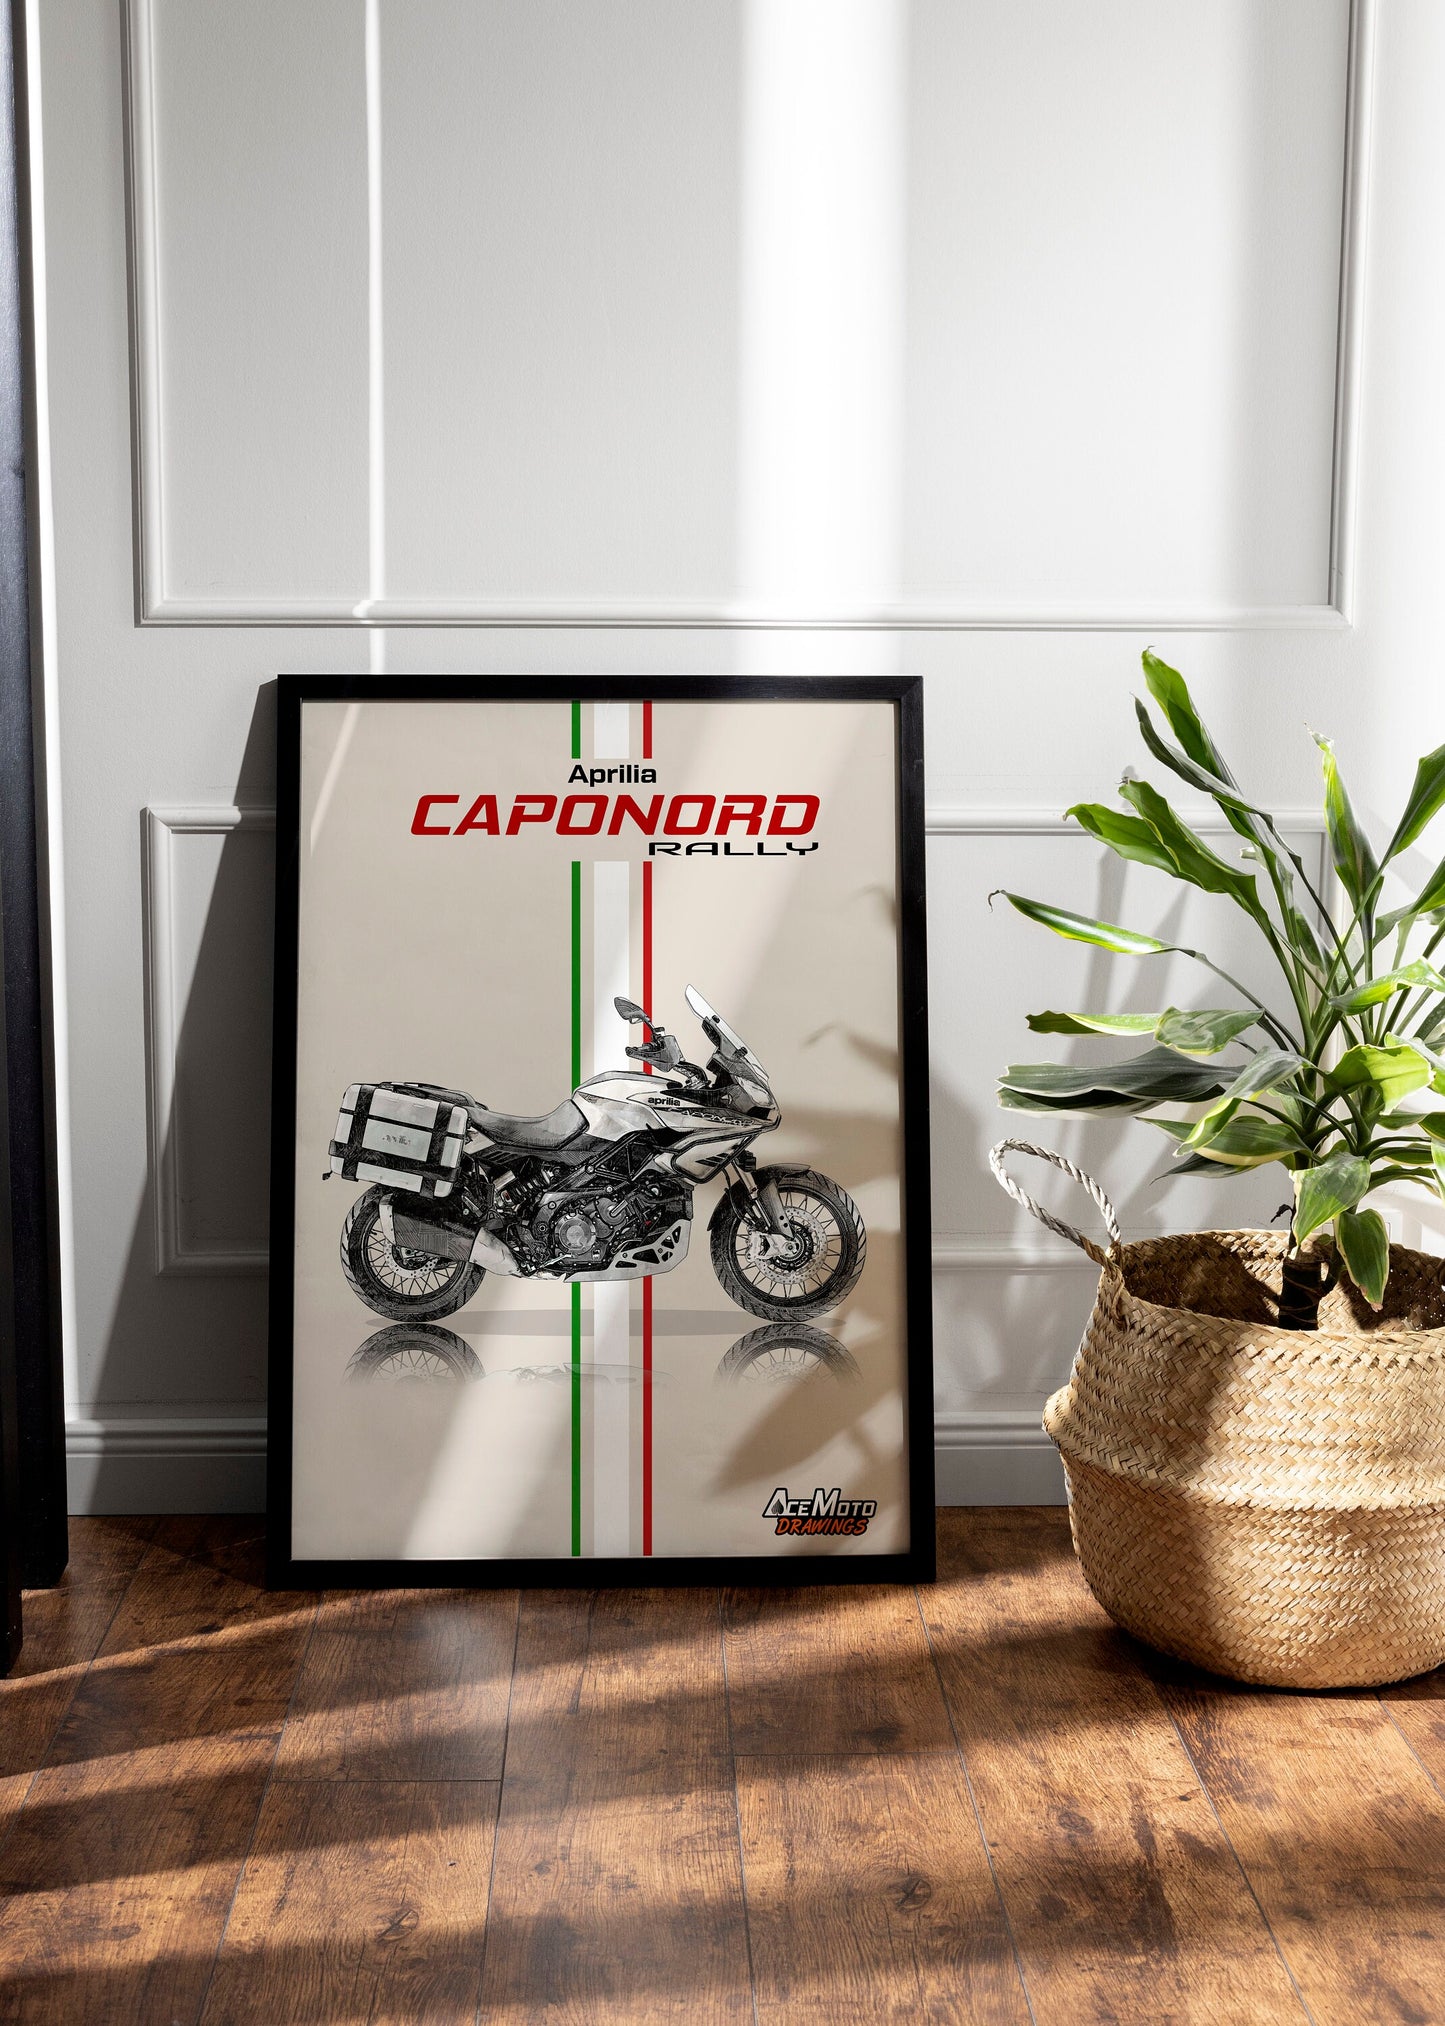 Aprilia Caponord 1200 Rally 2016 | Motorcycle Poster, Bike Wall Art Decor - Gift for Lovers Aprilia Rider PresentDrawing